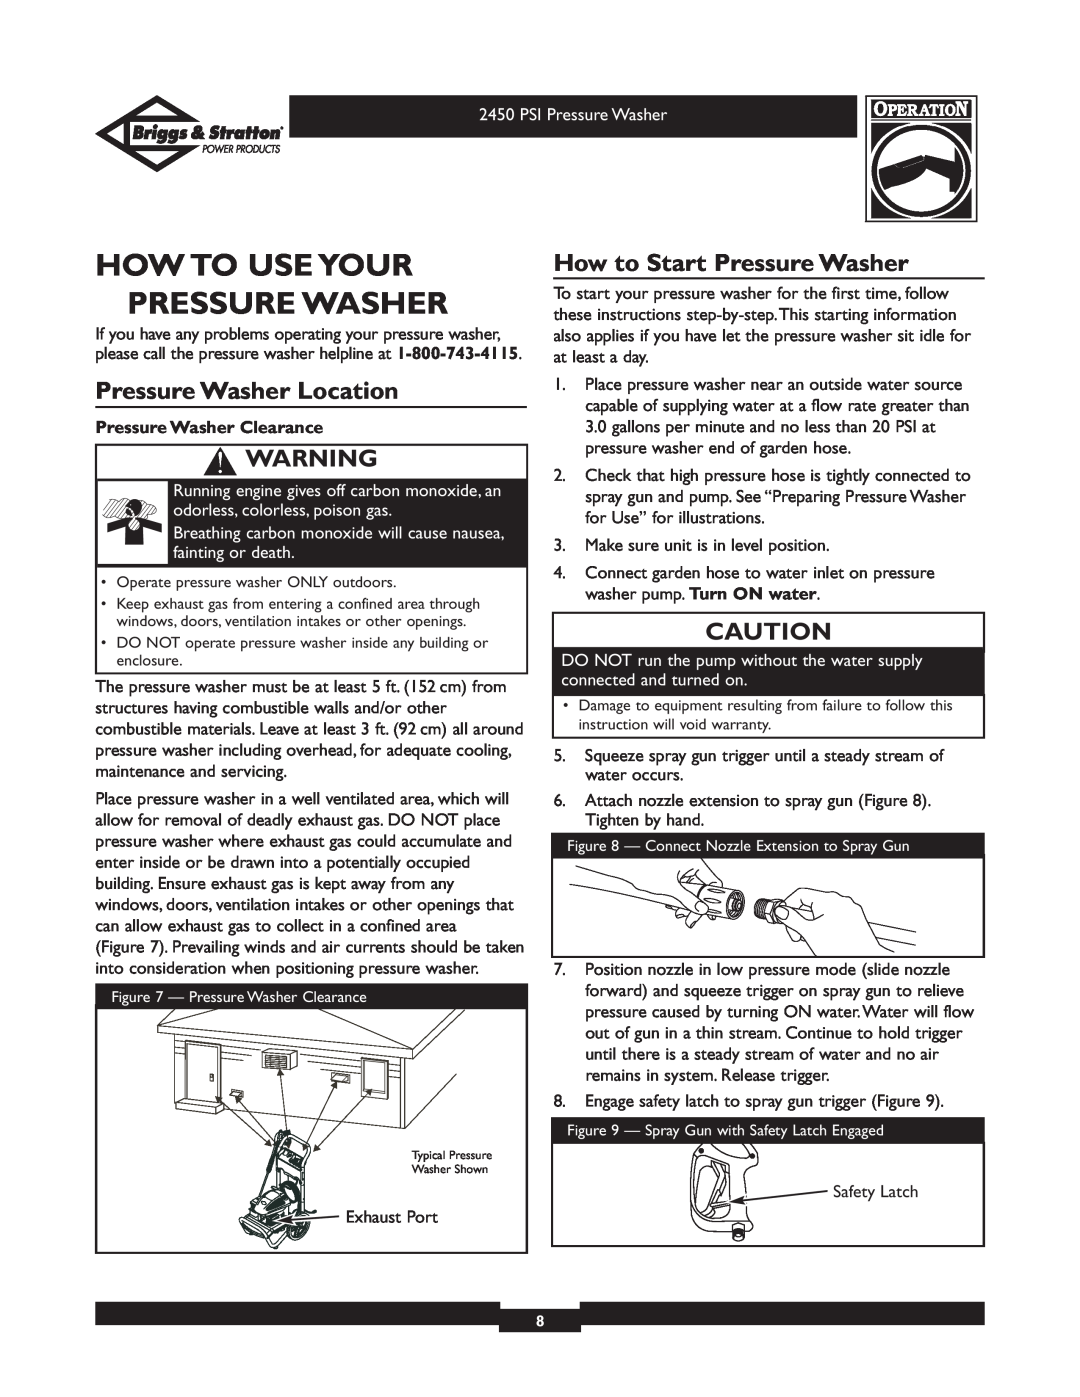 Briggs & Stratton 020219 How To Use Your Pressure Washer, Pressure Washer Location, How to Start Pressure Washer 